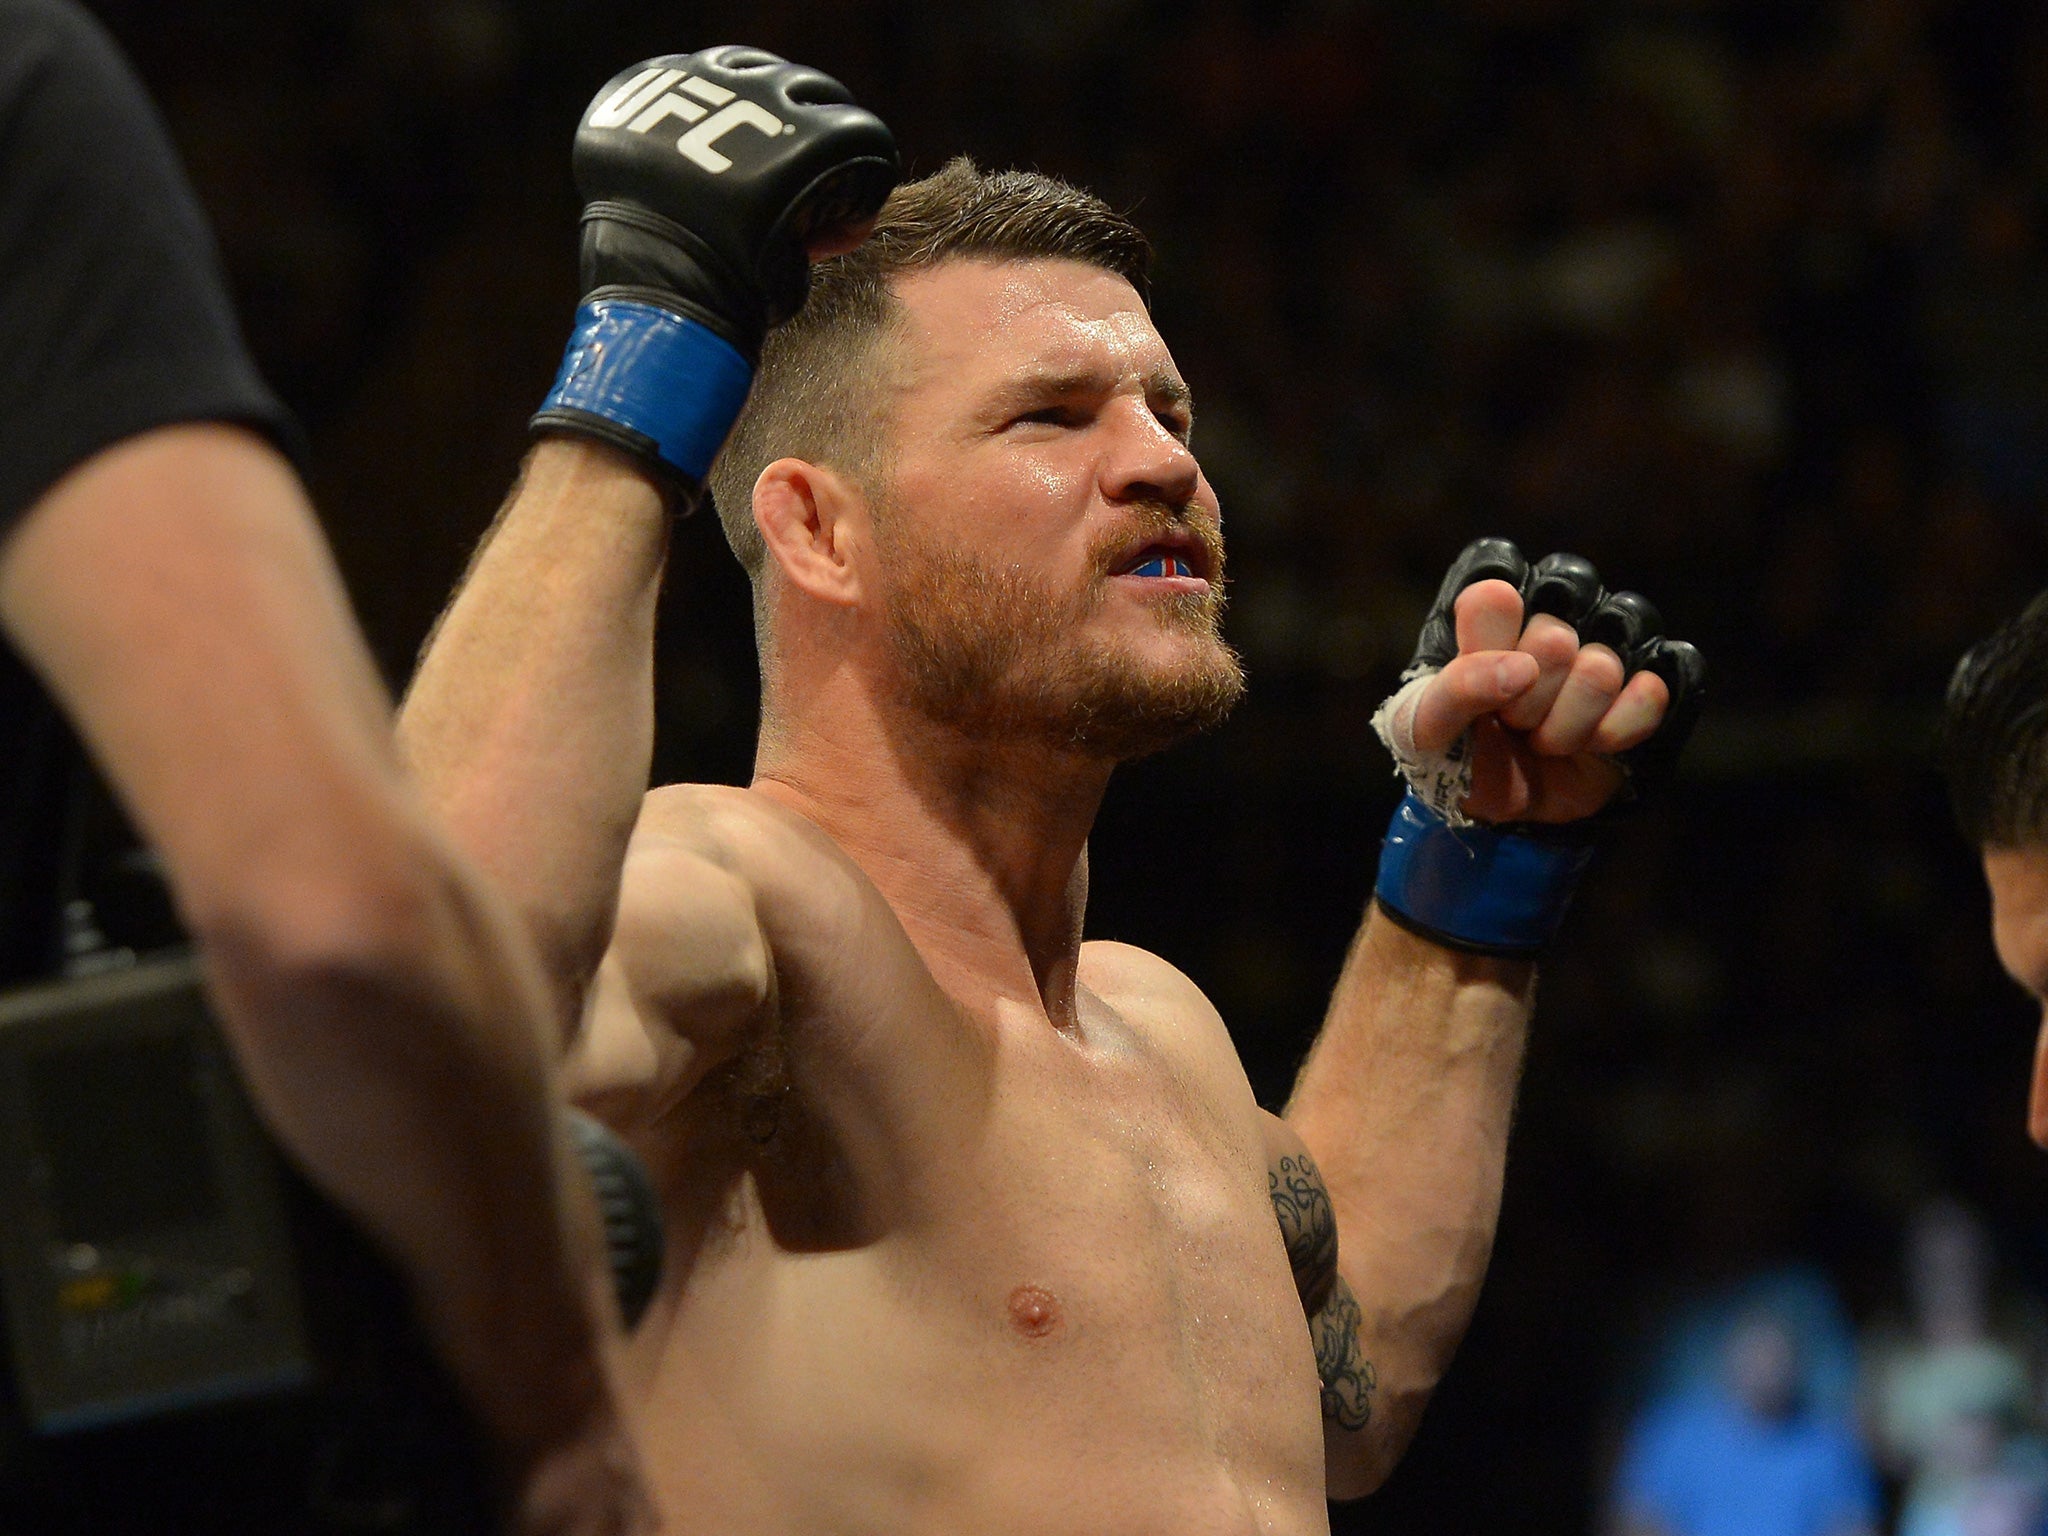 Bisping salutes the crowd at UFC 199